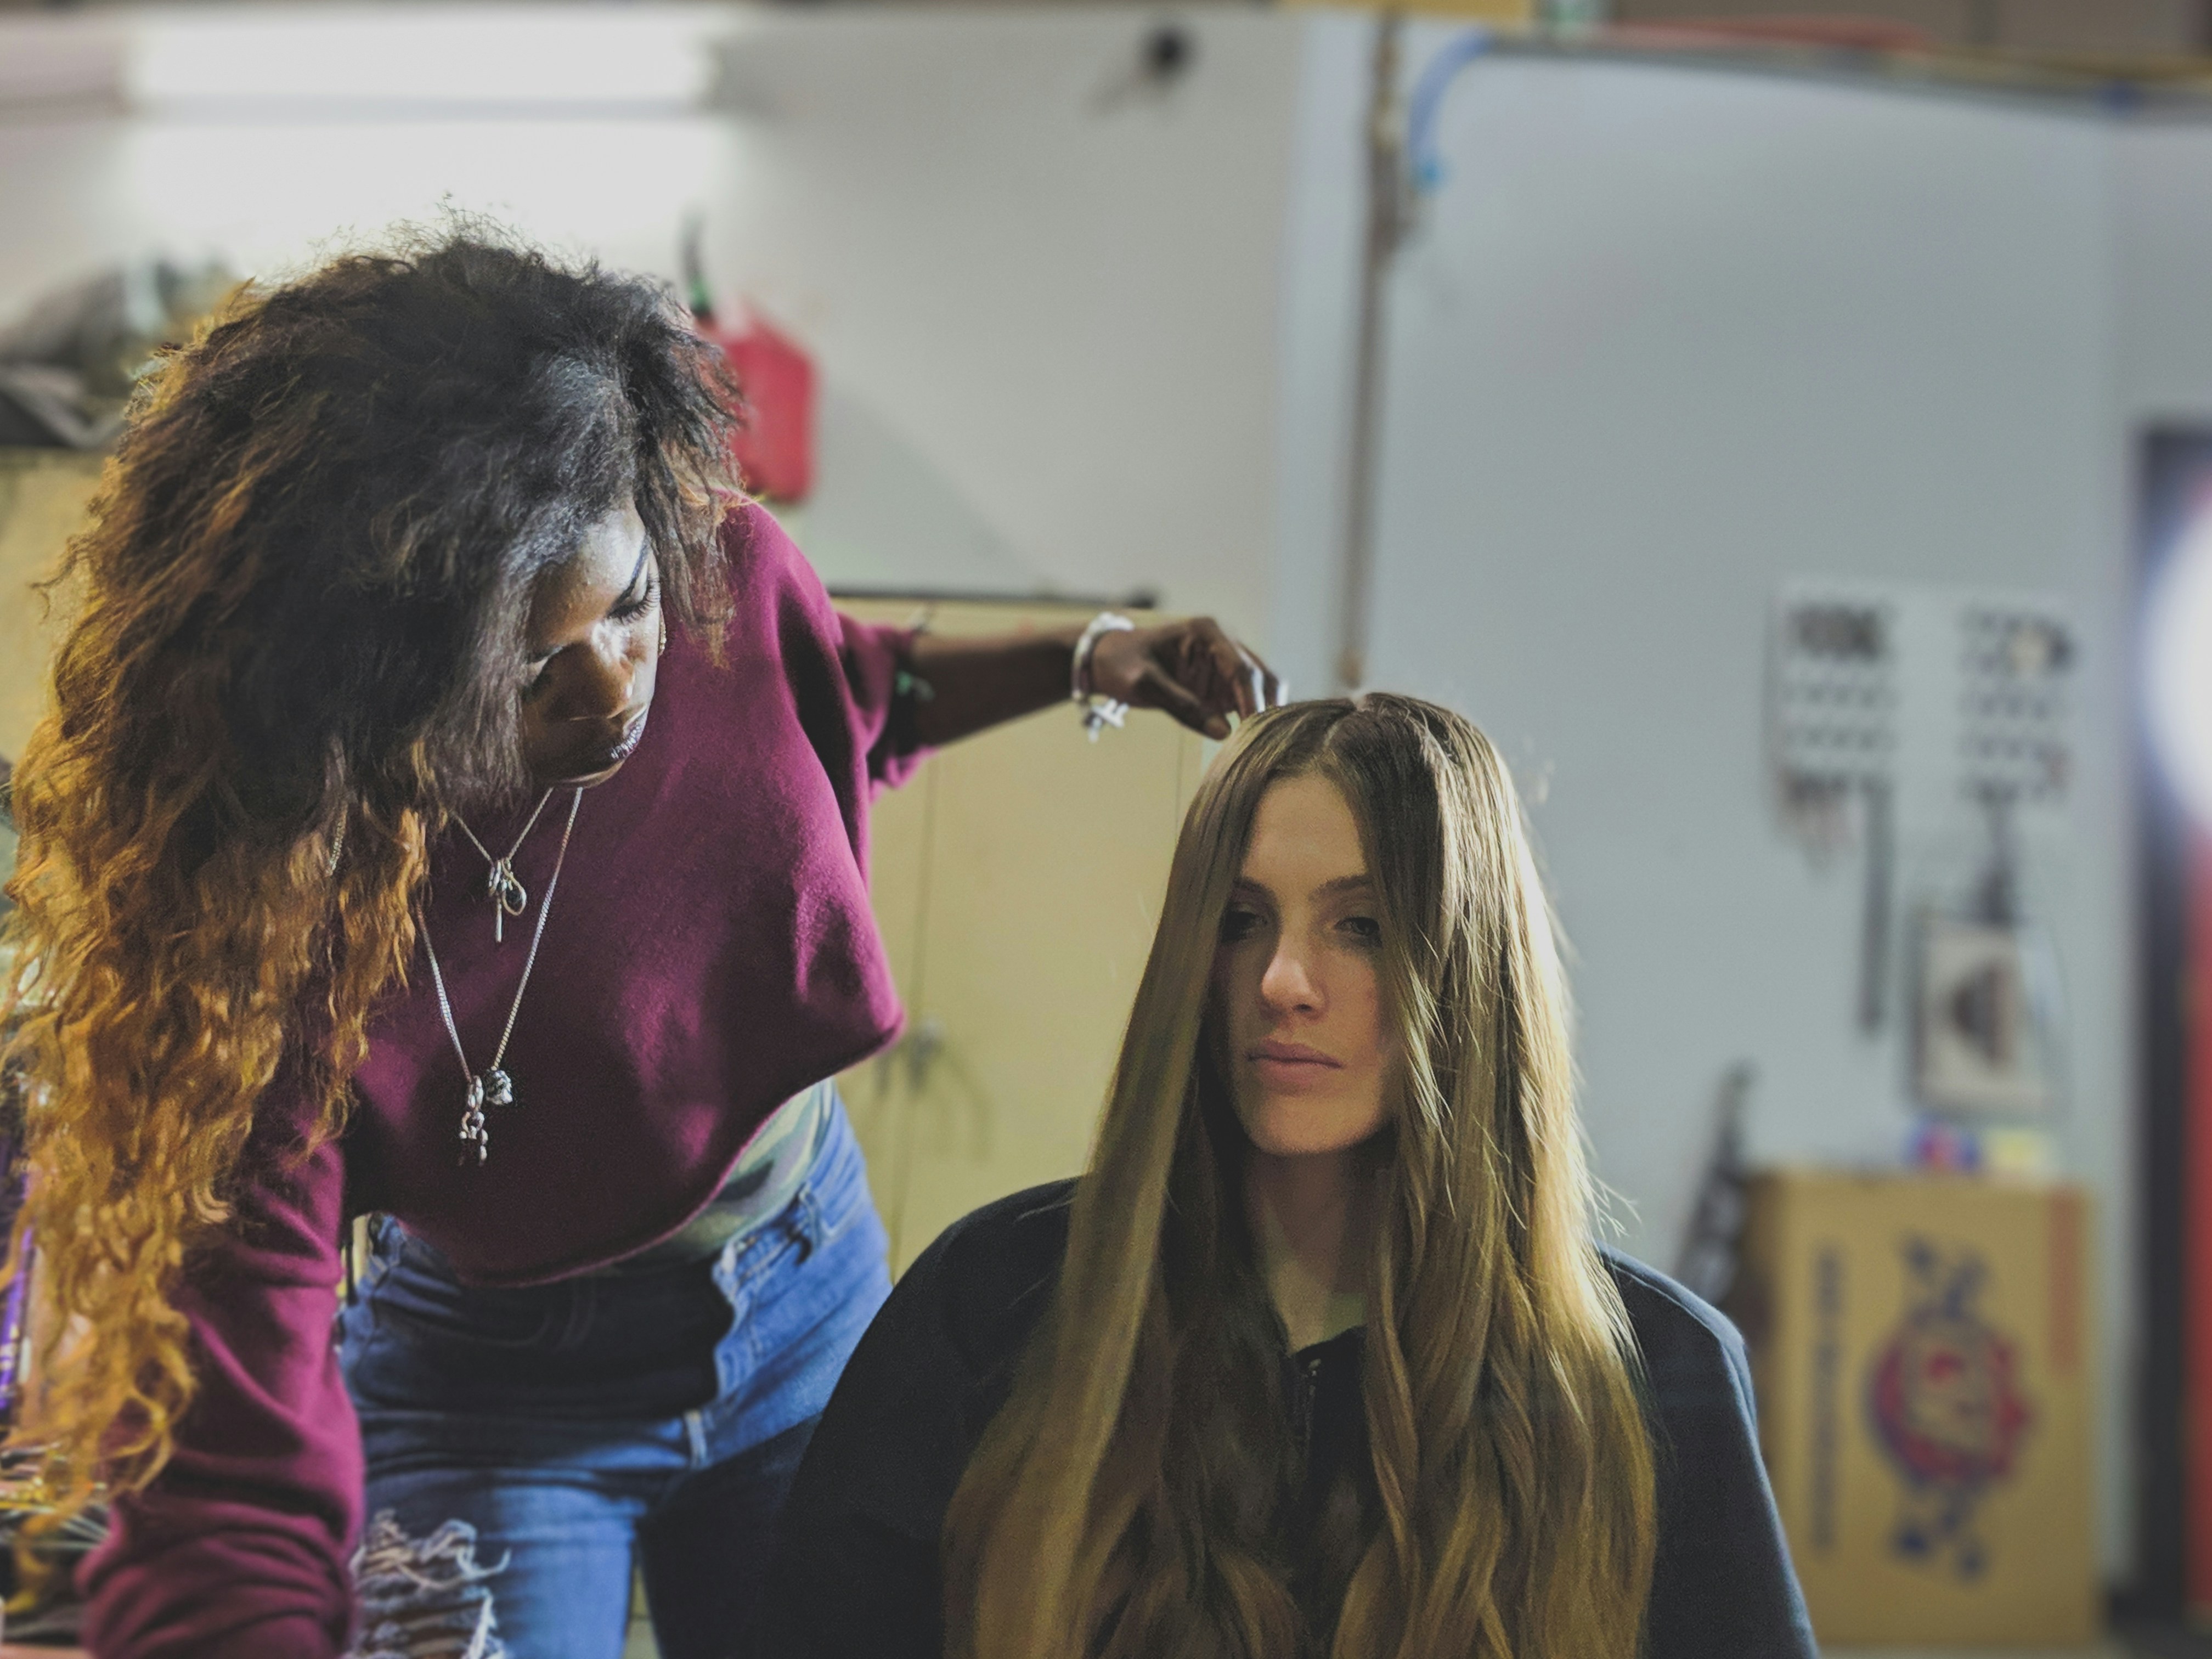 A stylist in a burgundy crop top works with her model before a shoot. Shot inside a repair shop located in Sterling Virginia.